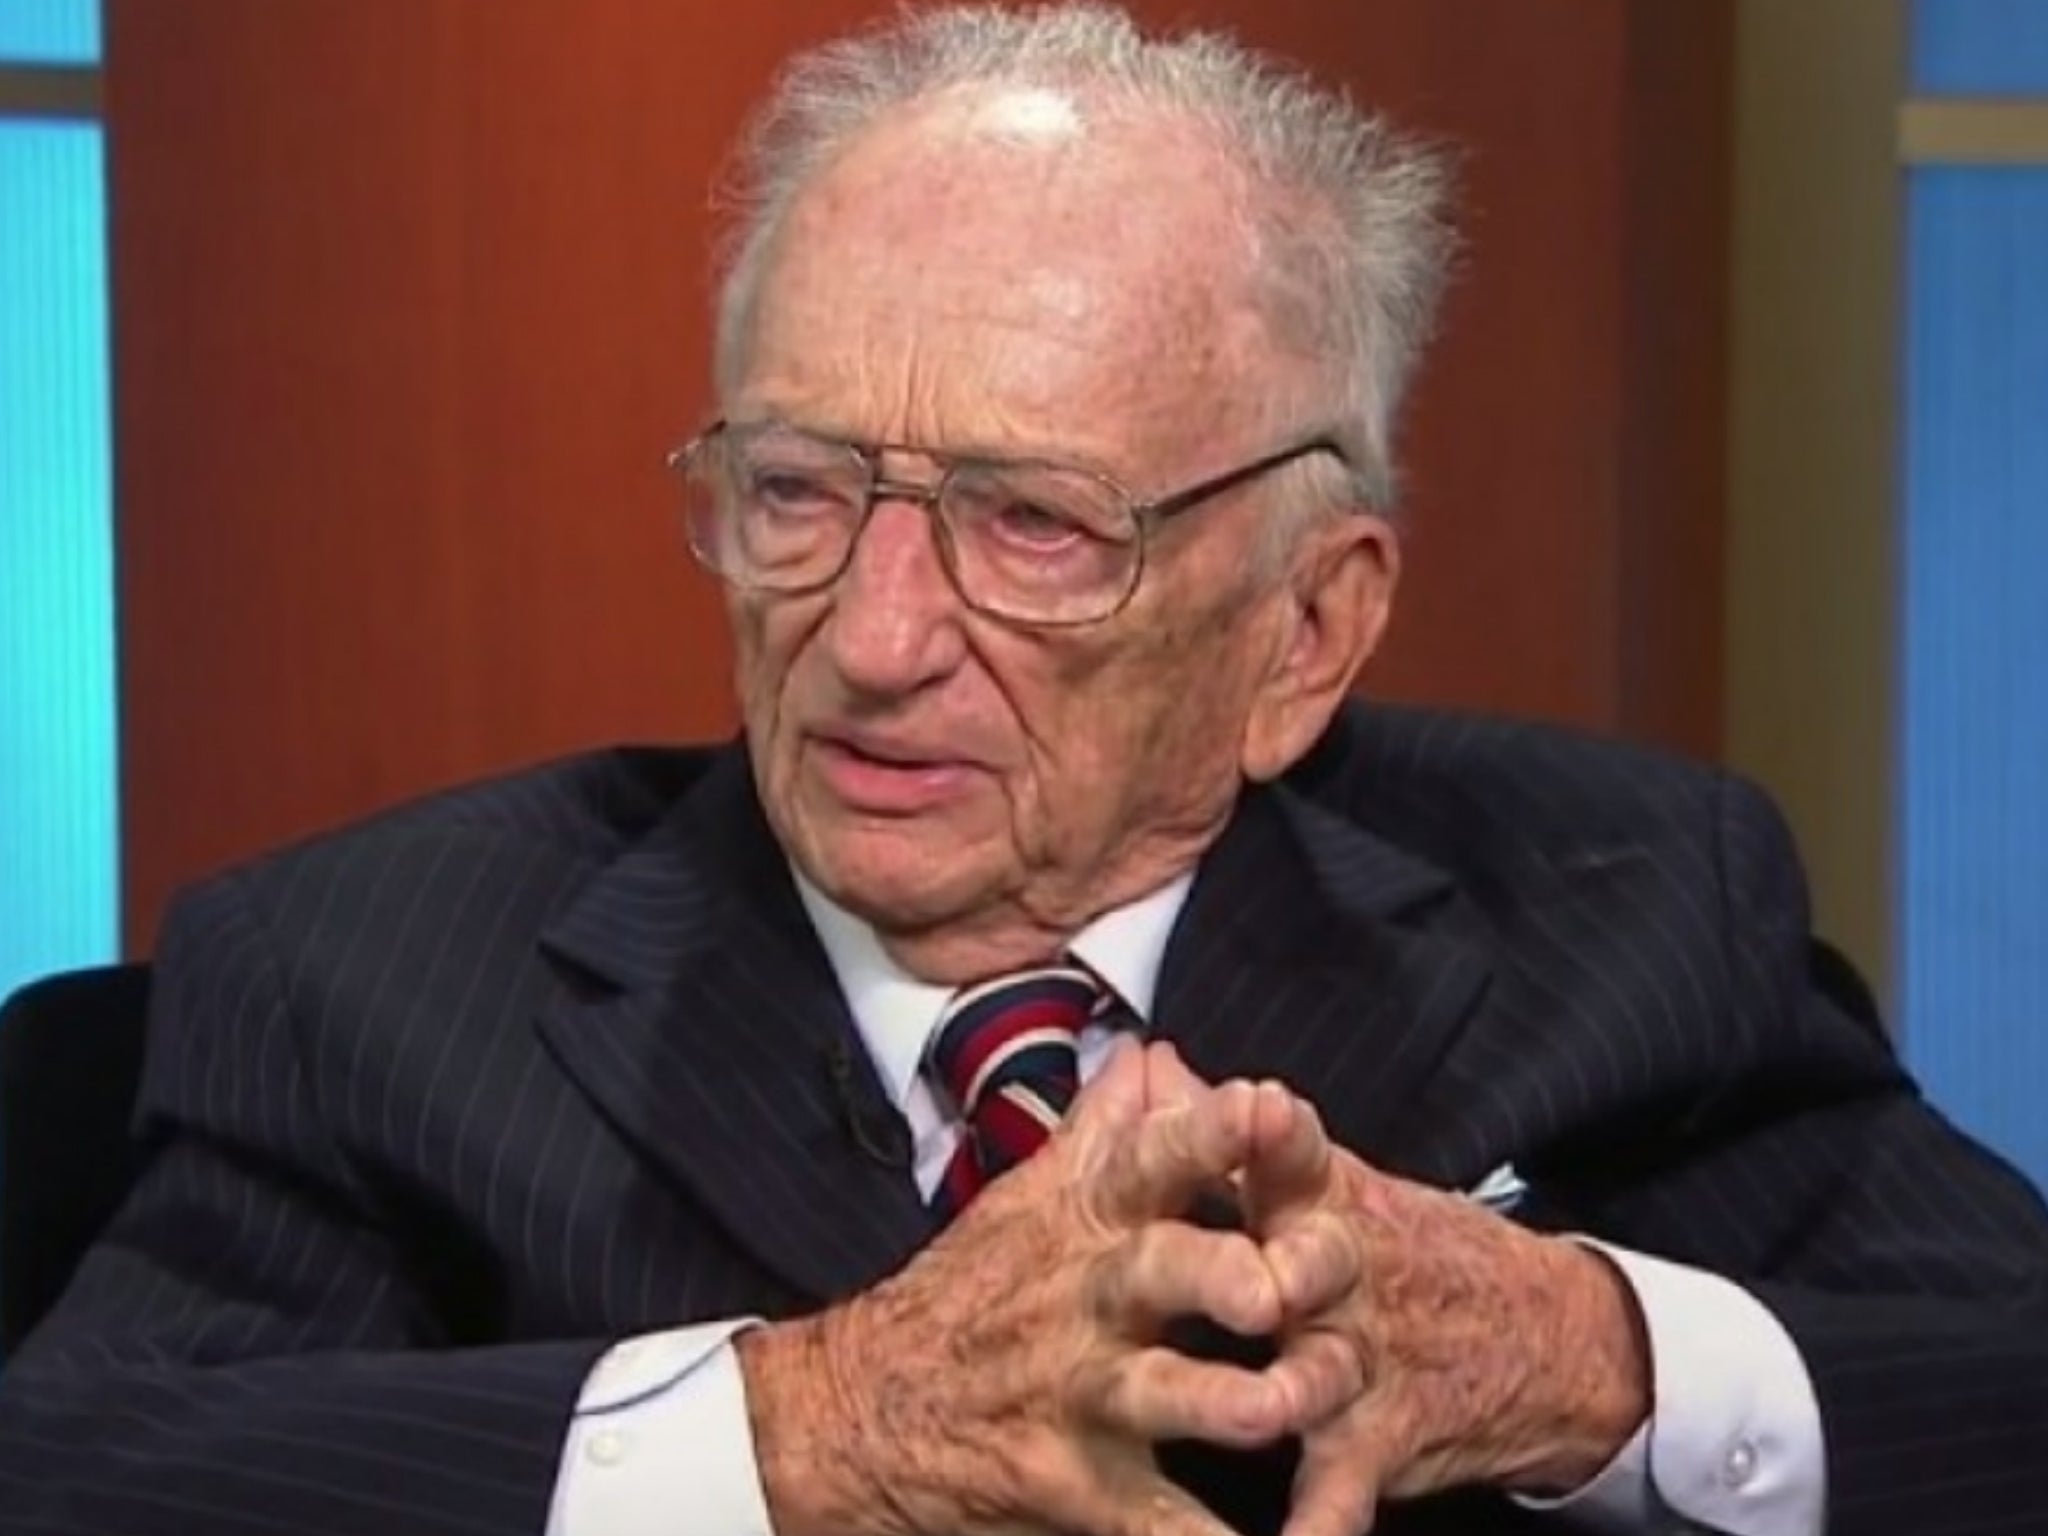 Last surviving prosecutor at Nuremberg trials says Trump&apos;s family separation policy is &apos;crime against humanity&apos;